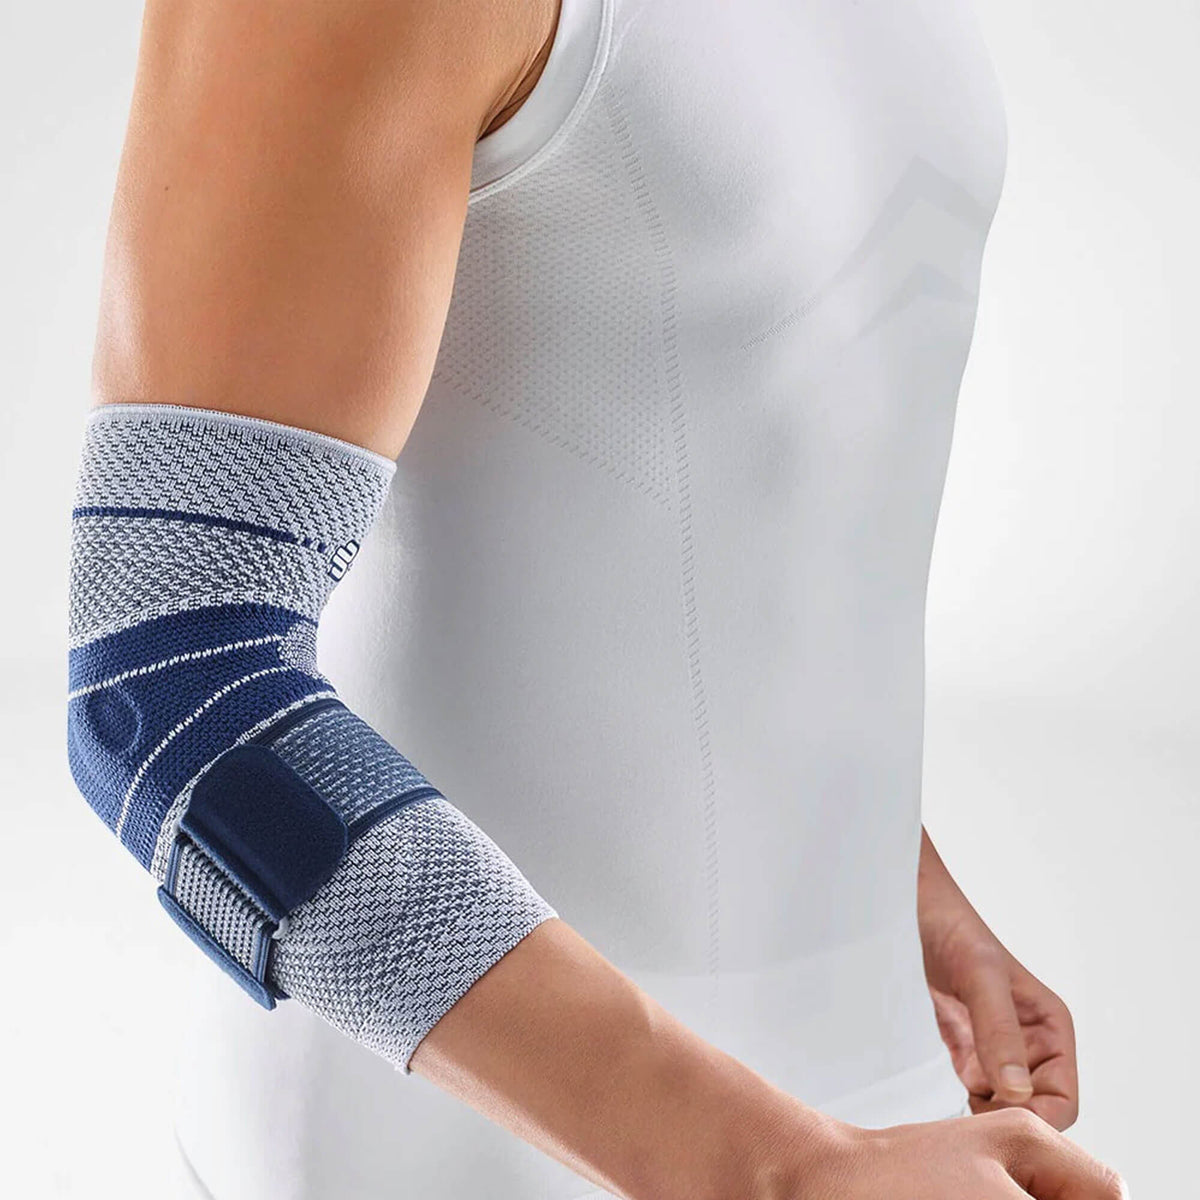 Sports Braces, Compression Sleeves, Sports Knee Brace, Sports Wrist Brace,  Sports Elbow Brace, Sports Ankle Brace, Knitted Wrist Sleeve, Knitted Knee  Sleeve, Knitted Elbow Sleeve, Knitted Ankle Sleeve, Face Masks Canada, 3